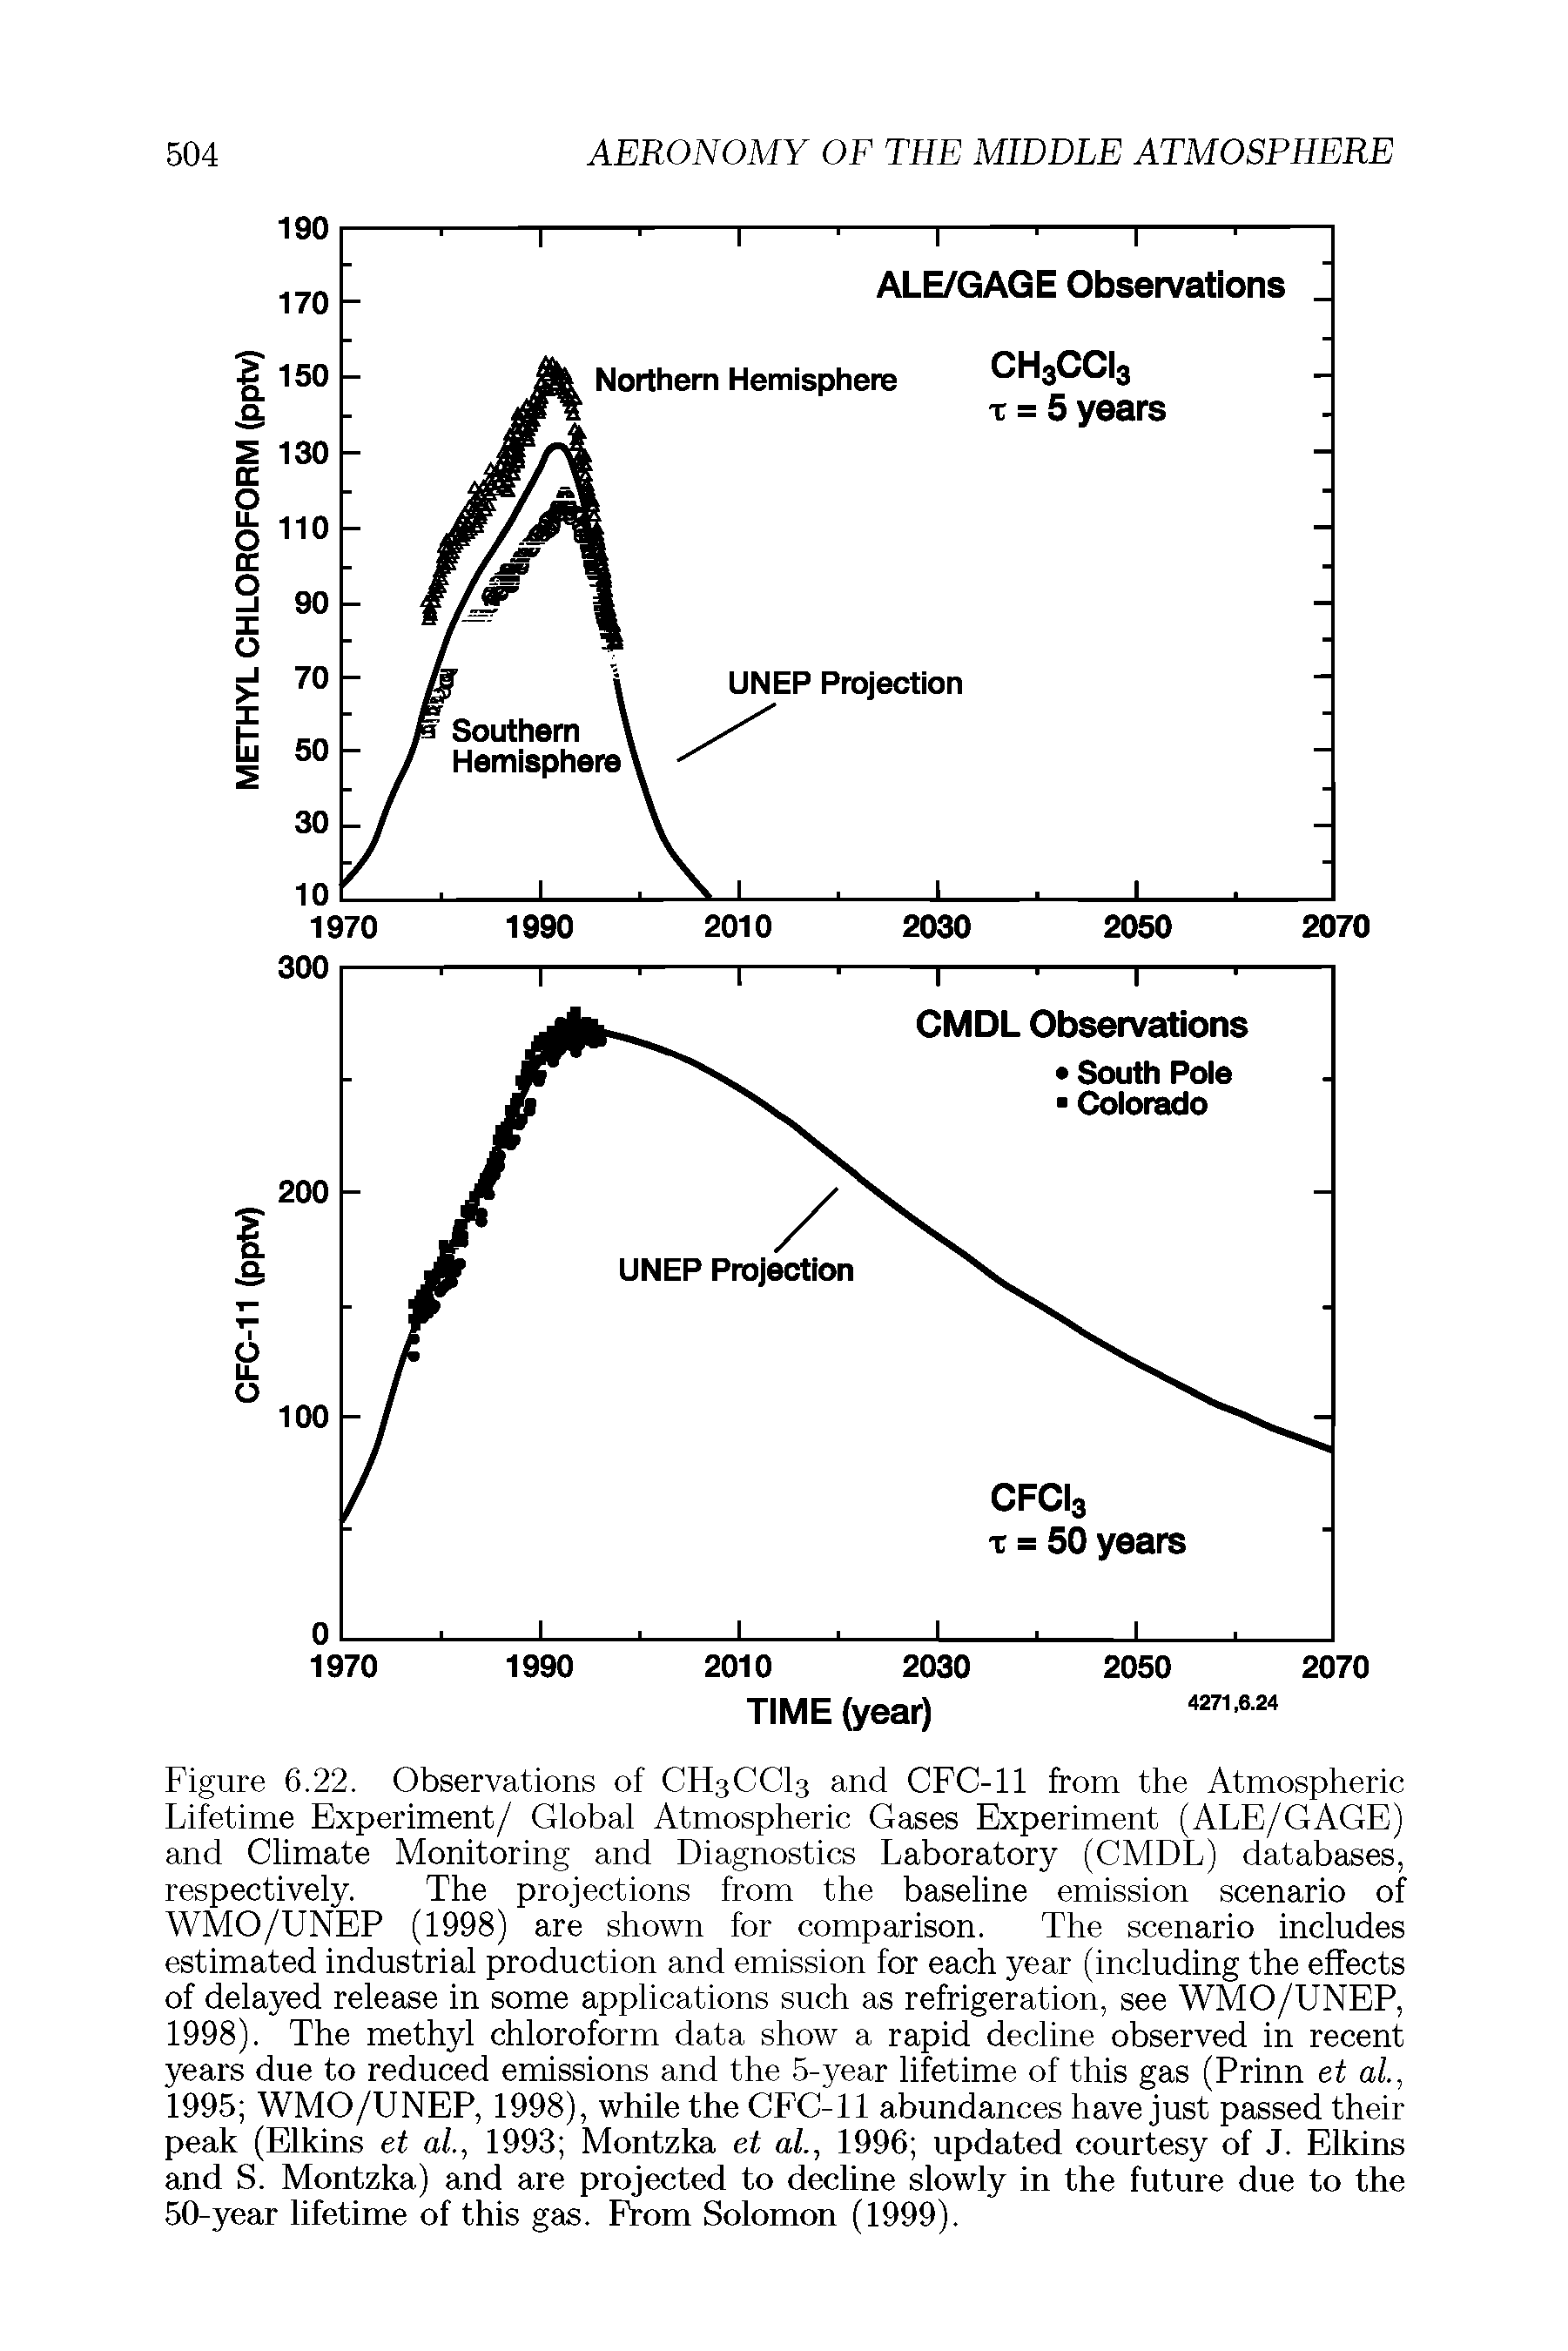 Figure 6.22. Observations of CH3CCI3 and CFC-11 from the Atmospheric Lifetime Experiment/ Global Atmospheric Gases Experiment (ALE/GAGE) and Climate Monitoring and Diagnostics Laboratory (CMDL) databases, respectively. The projections from the baseline emission scenario of WMO/UNEP (1998) are shown for comparison. The scenario includes estimated industrial production and emission for each year (including the effects of delayed release in some applications such as refrigeration, see WMO/UNEP, 1998). The methyl chloroform data show a rapid decline observed in recent years due to reduced emissions and the 5-year lifetime of this gas (Prinn et al, 1995 WMO/UNEP, 1998), while the CFC-11 abundances have just passed their peak (Elkins et al, 1993 Montzka et al, 1996 updated courtesy of J. Elkins and S. Montzka) and are projected to decline slowly in the future due to the 50-year lifetime of this gas. From Solomon (1999).